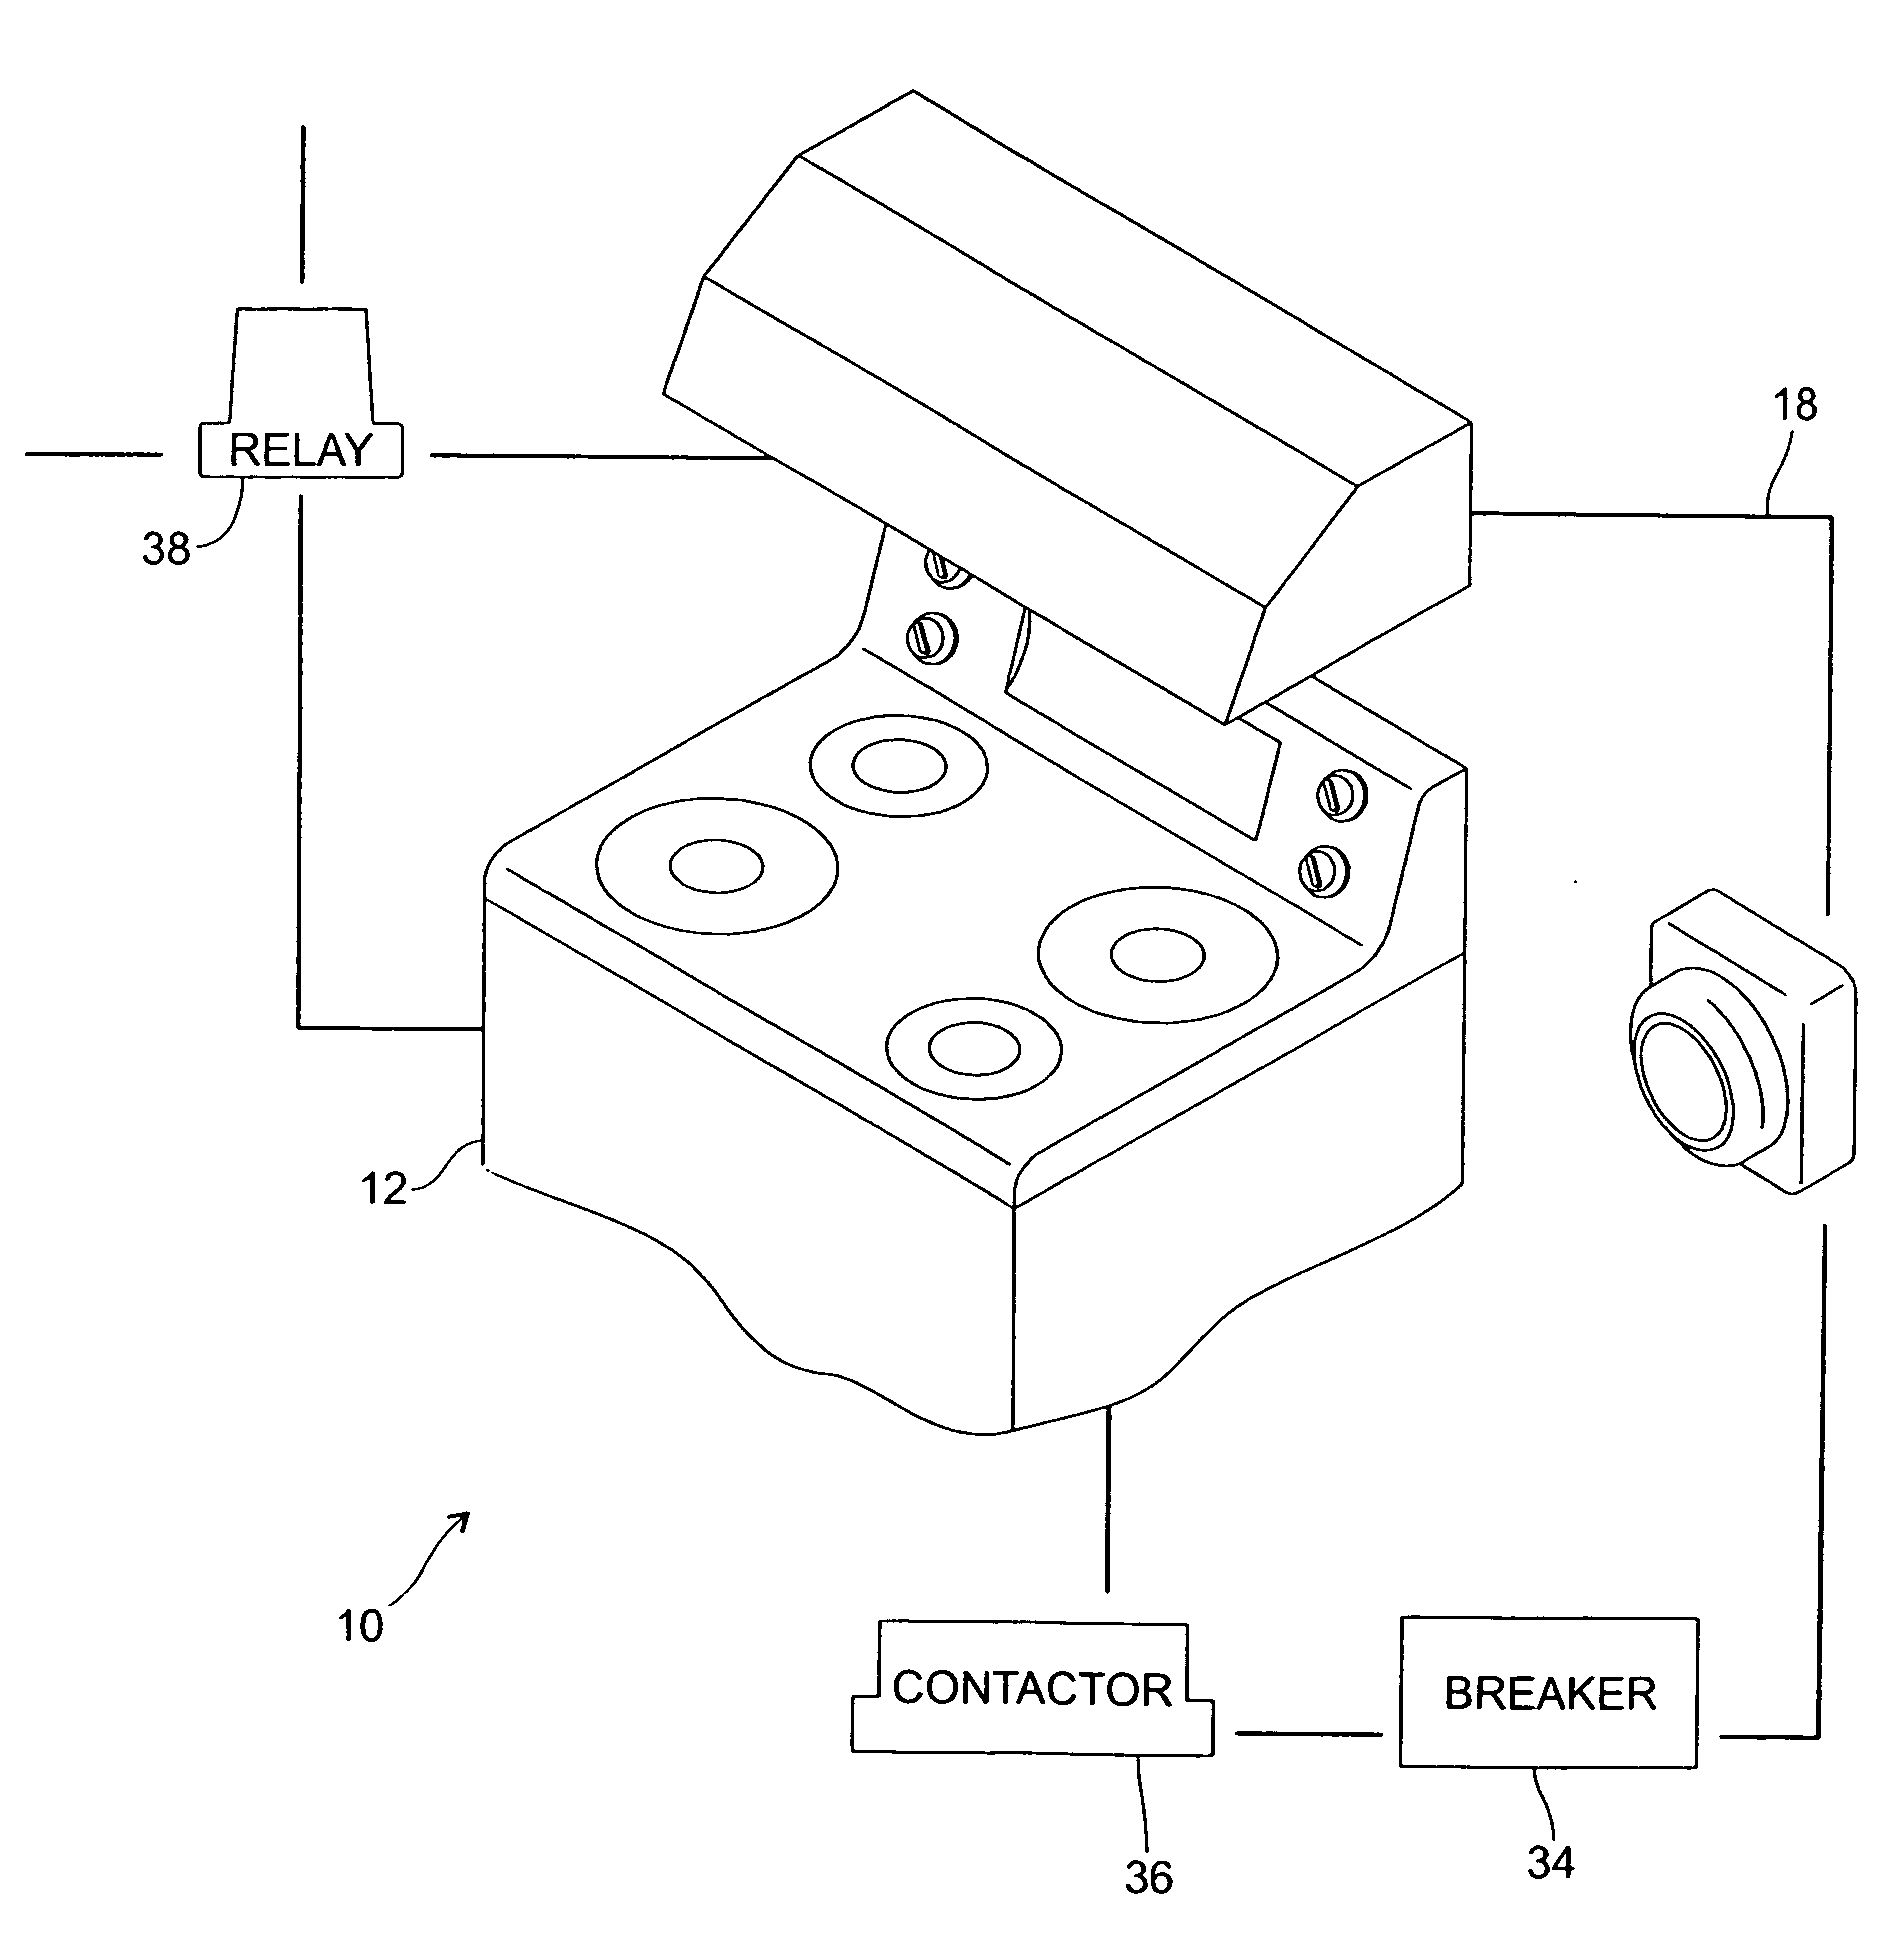 Safety shut off system for household appliances